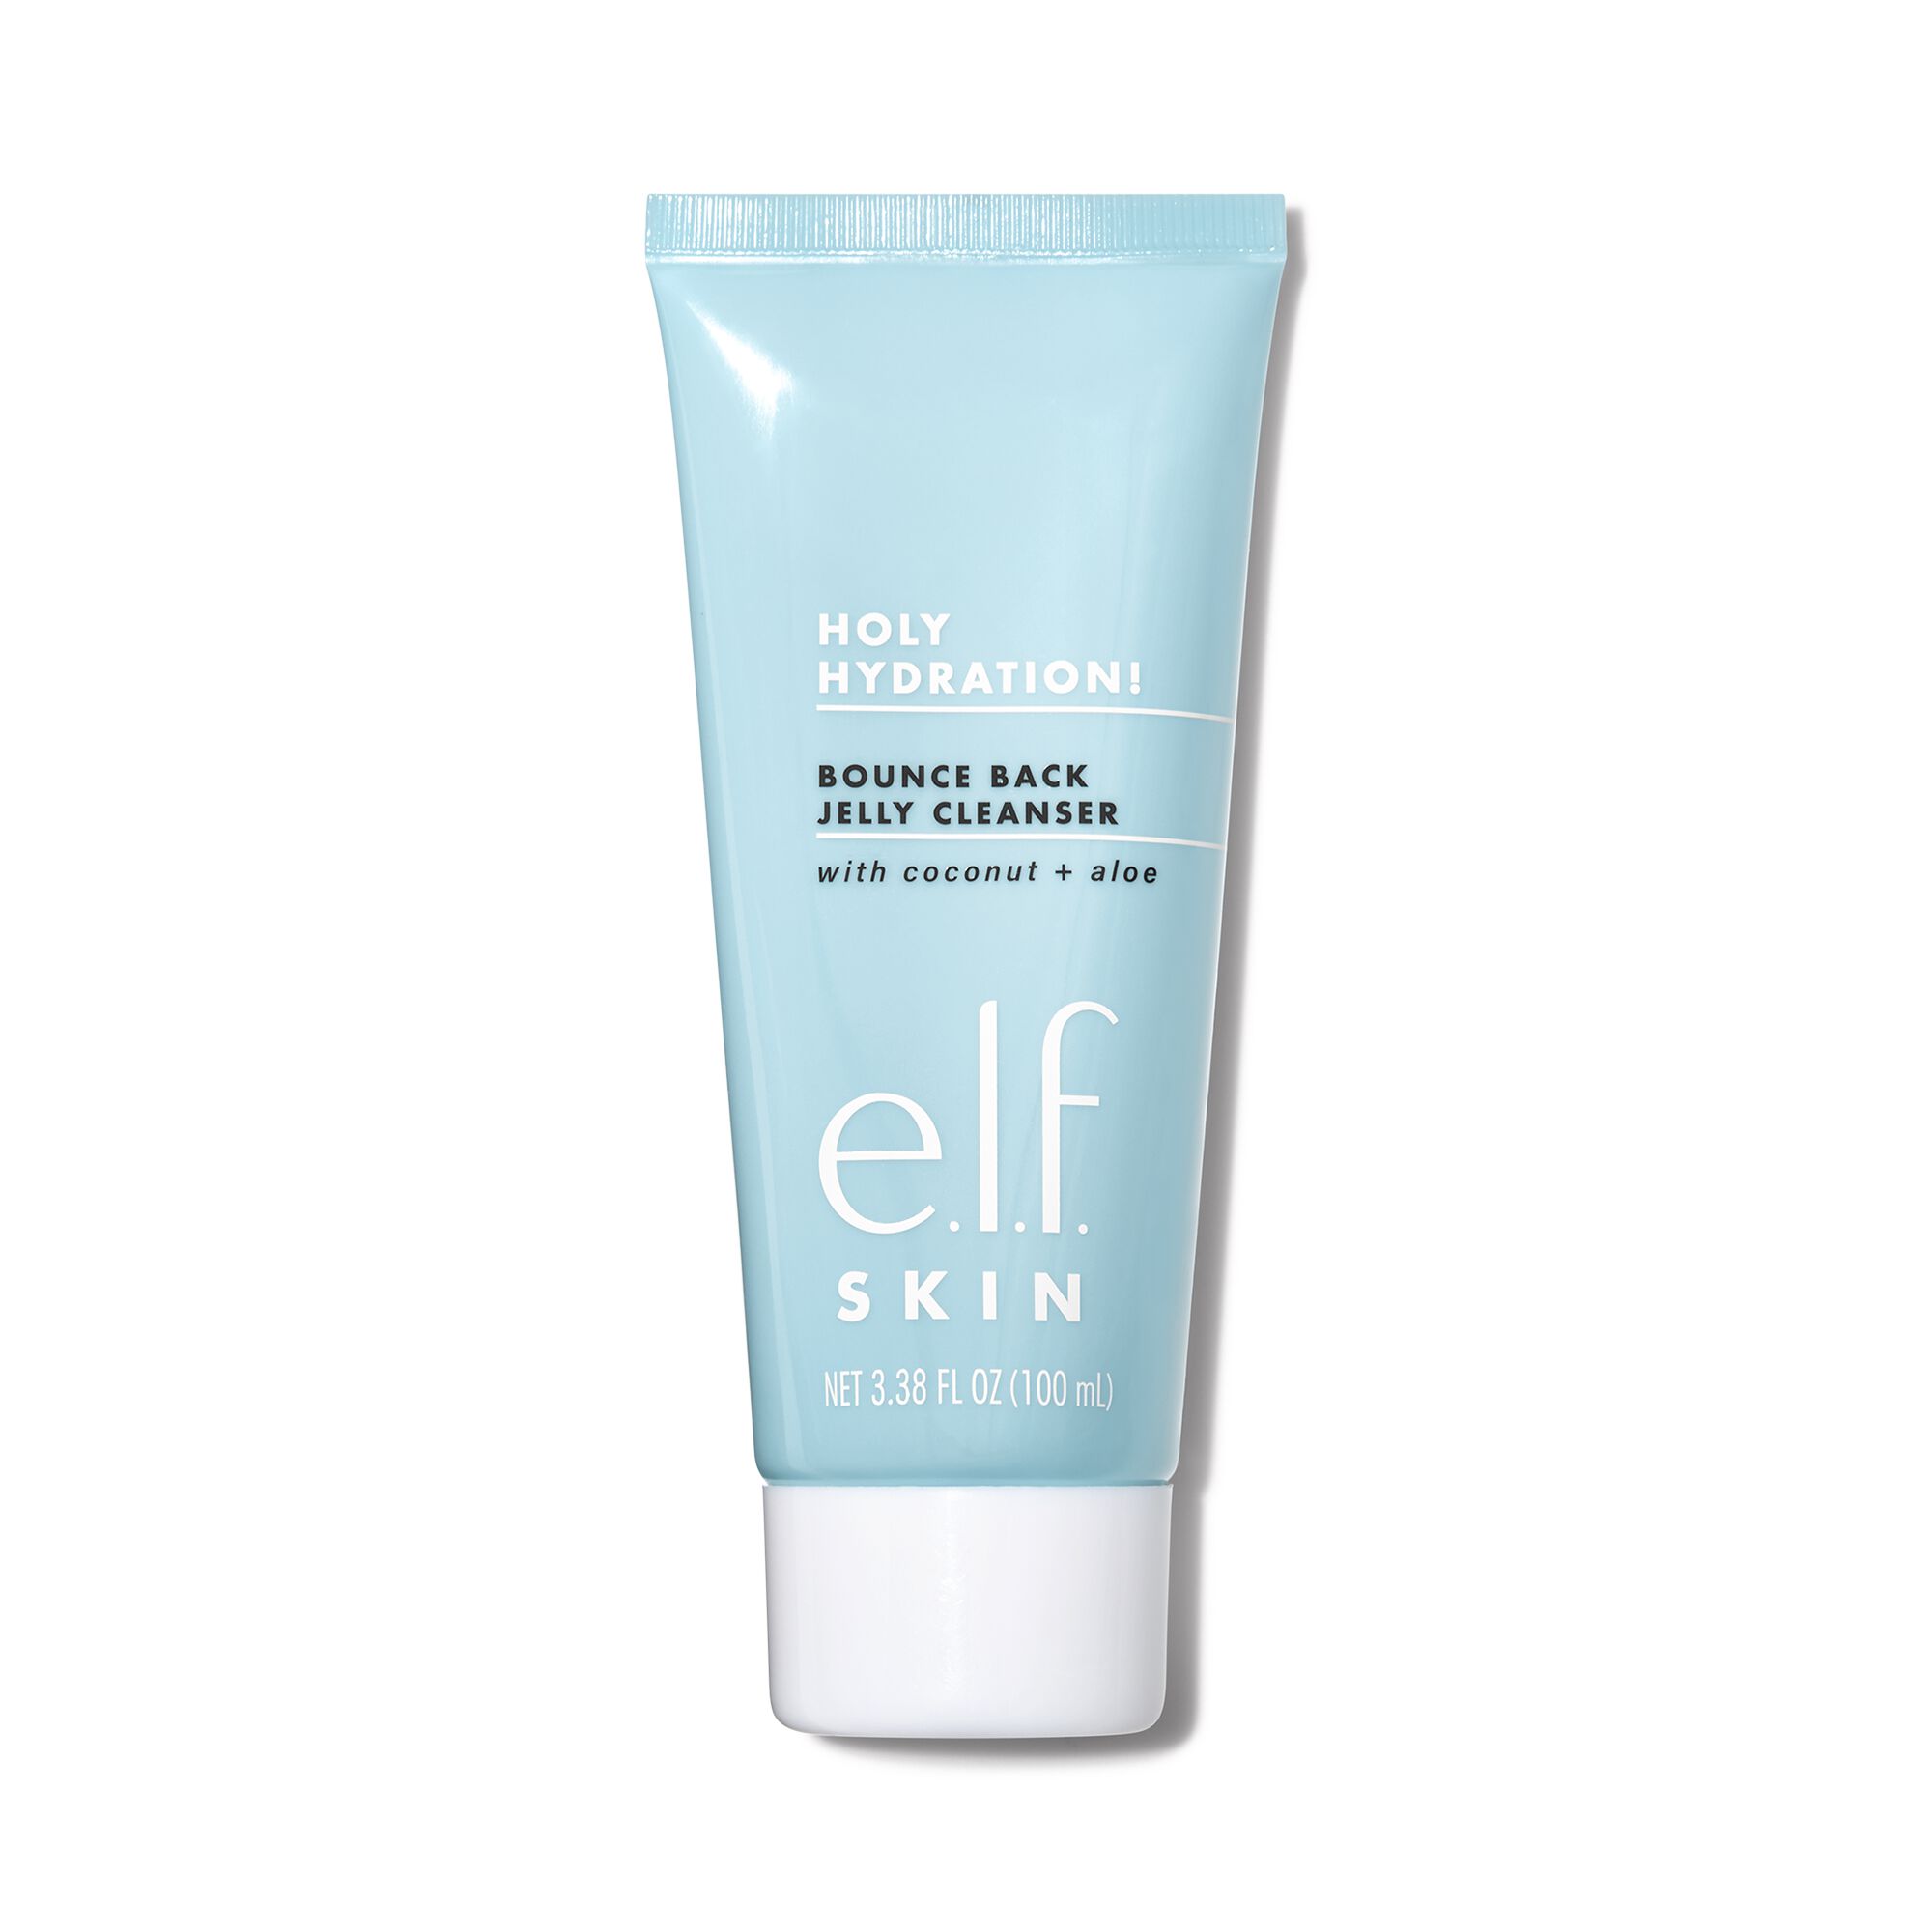 E.l.f. Bounce Back Jelly Cleanser